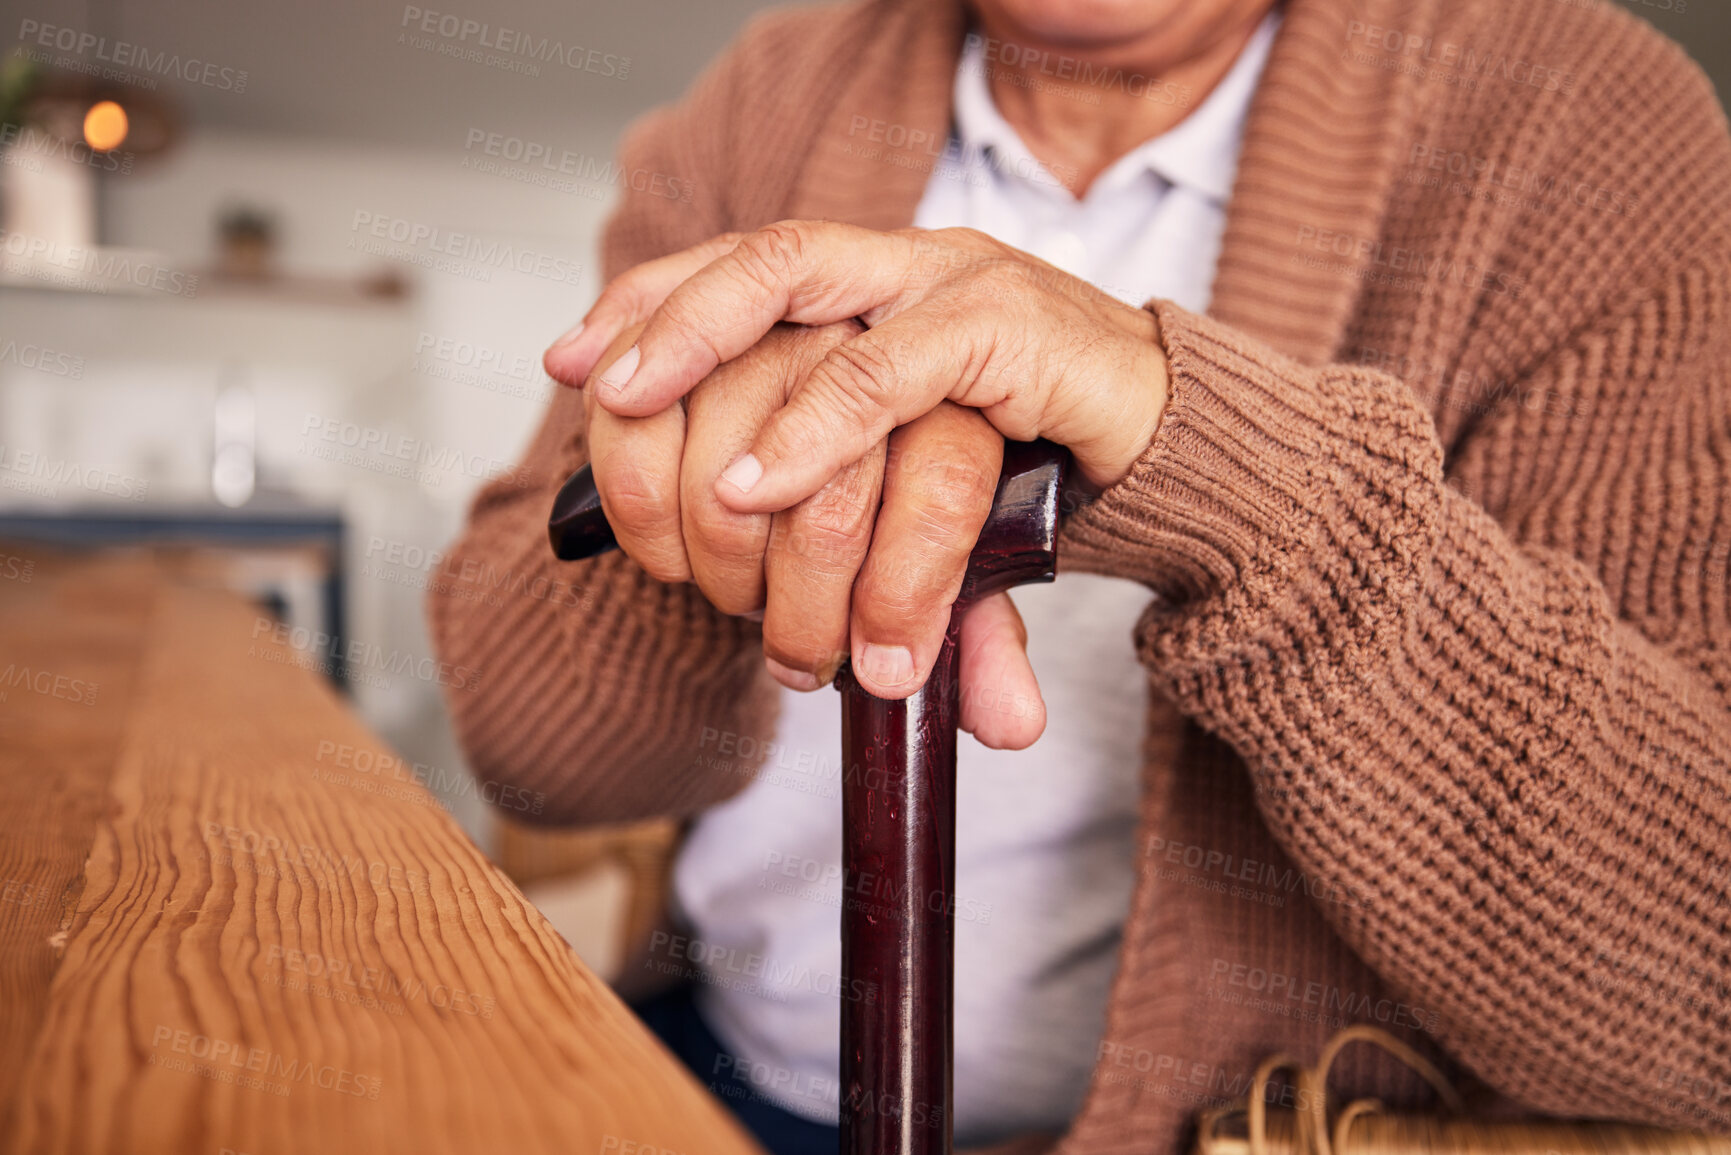 Buy stock photo Closeup, hands and cane of person with disability, arthritis and aid of osteoporosis, parkinson or stroke. Retirement, senior patient and holding walking stick of support, help or healthcare mobility